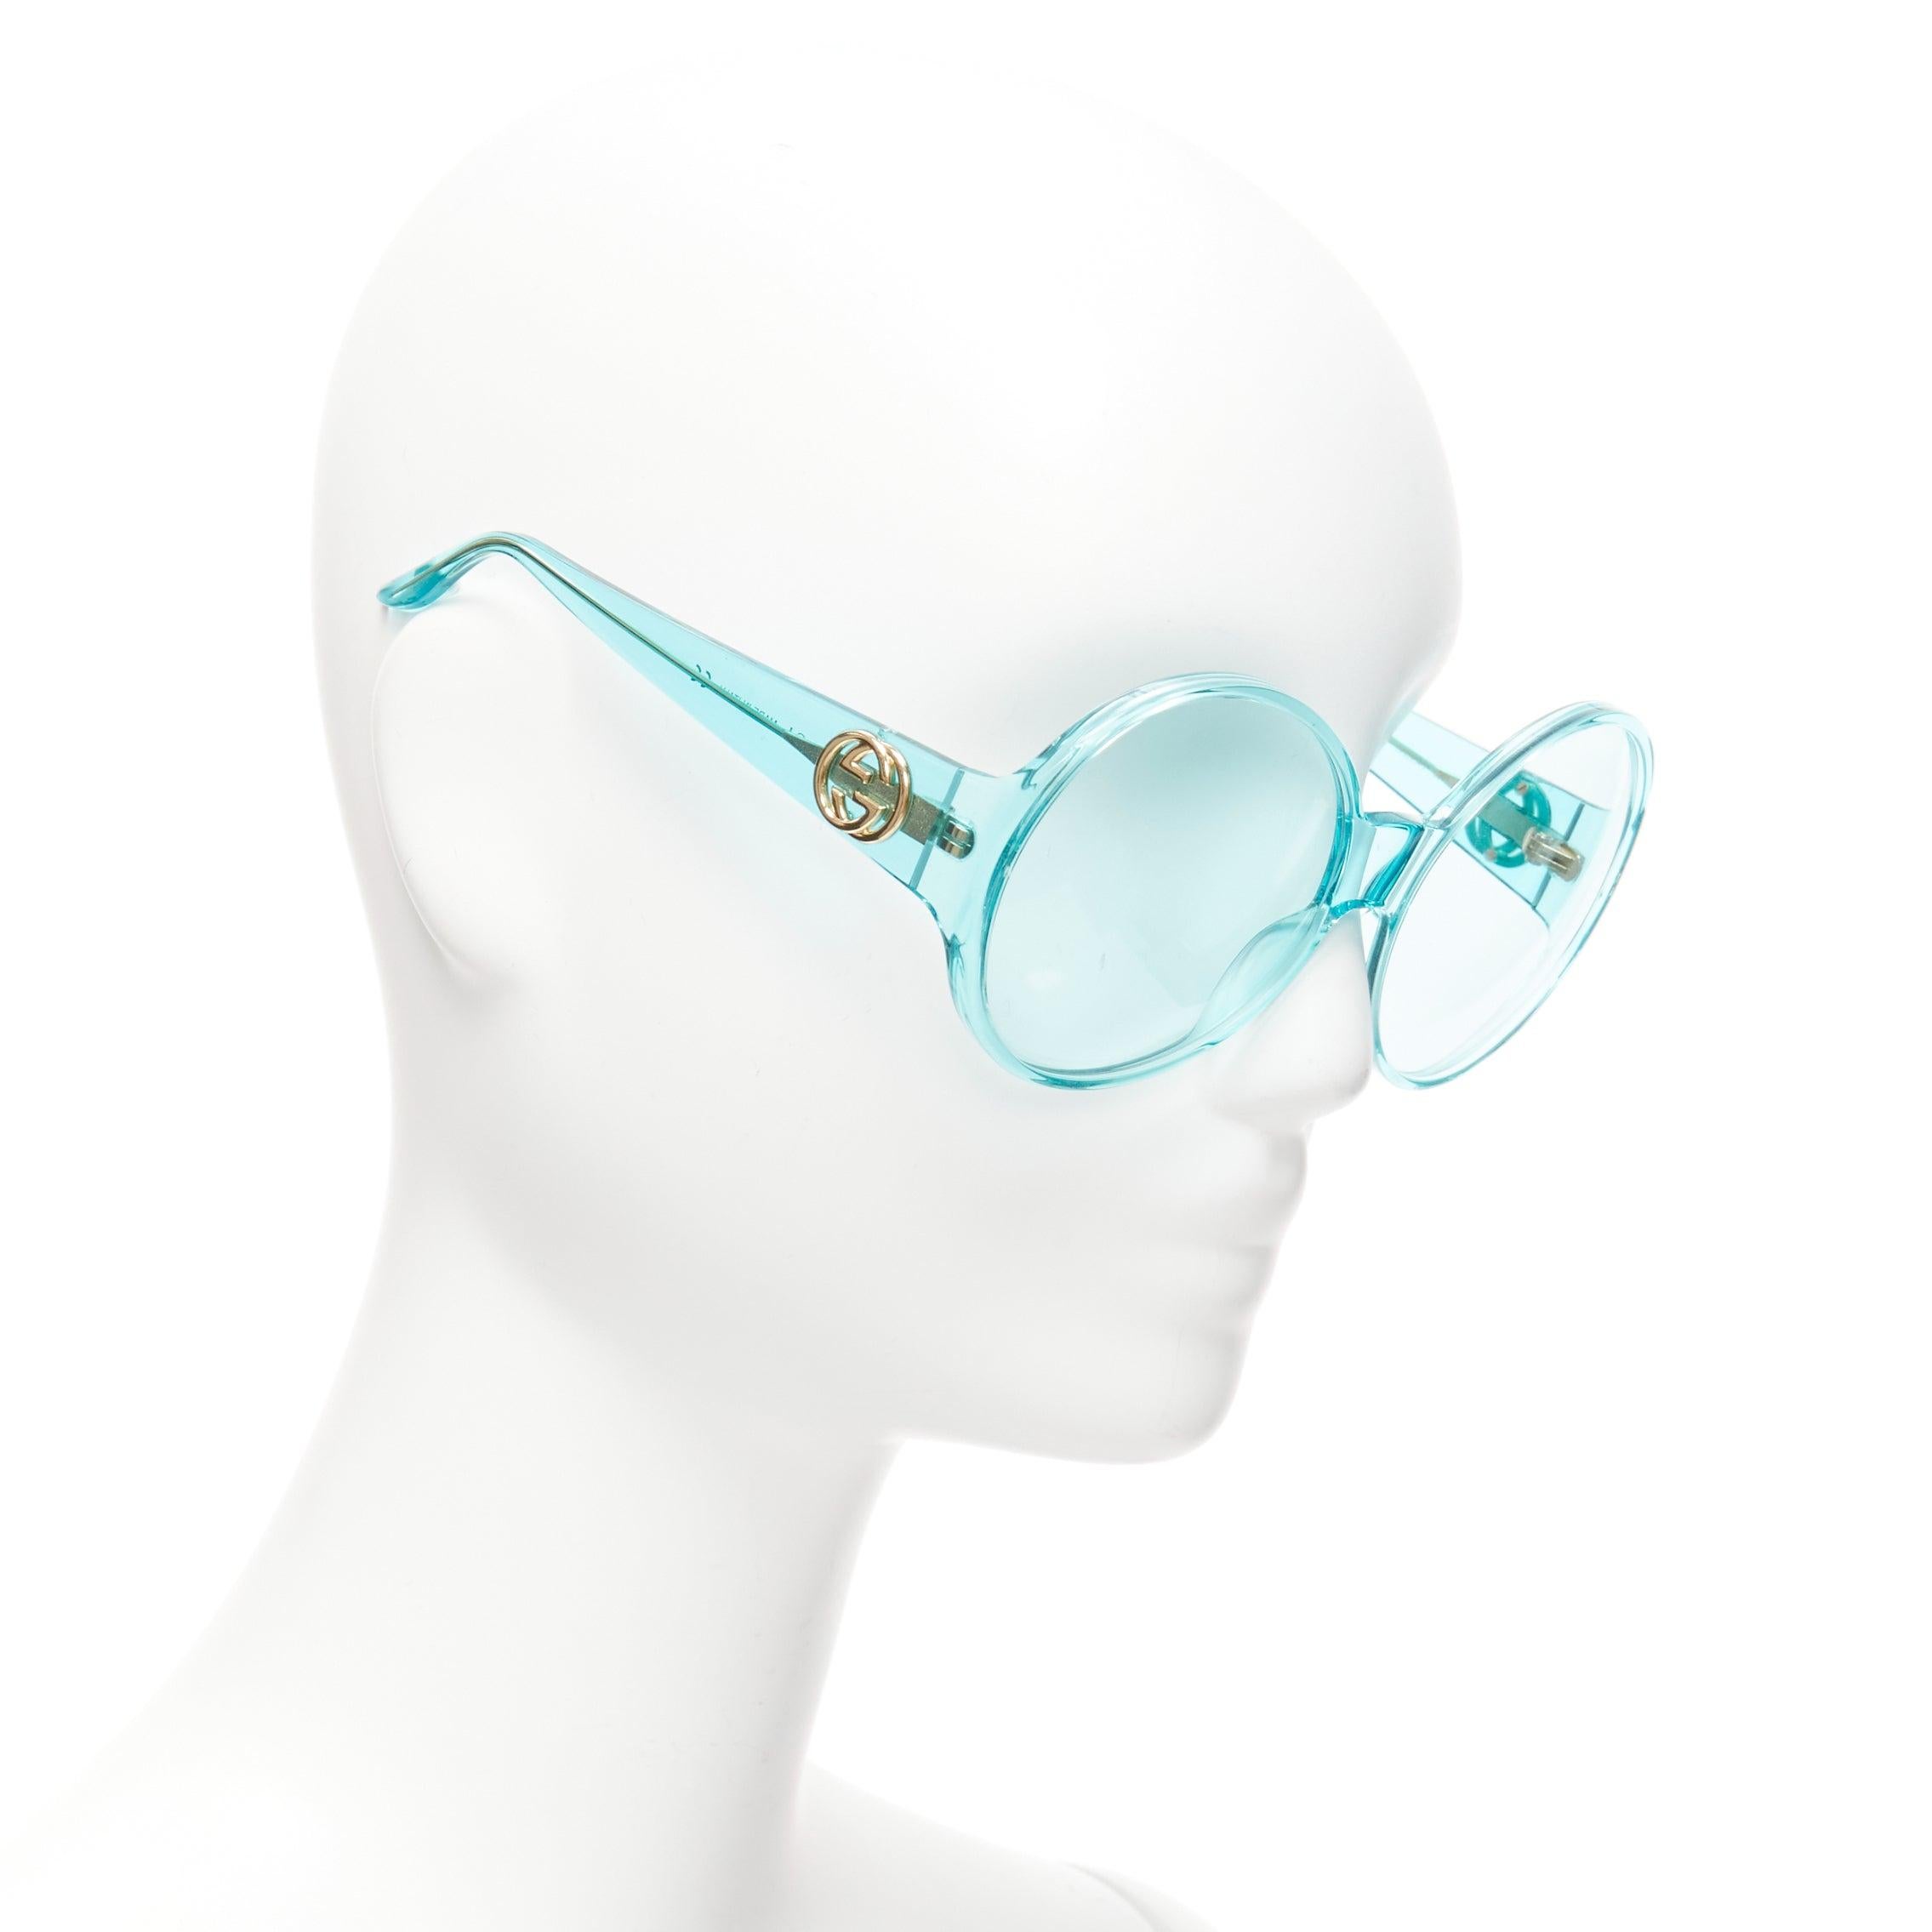 GUCCI Alessandro Michele GG0954S blue hue round frame oversized sunnies
Reference: TGAS/D01039
Brand: Gucci
Designer: Alessandro Michele
Material: Acetate
Color: Blue, Green
Pattern: Solid
Lining: Blue Acetate
Extra Details: Logo at sides.
Made in: